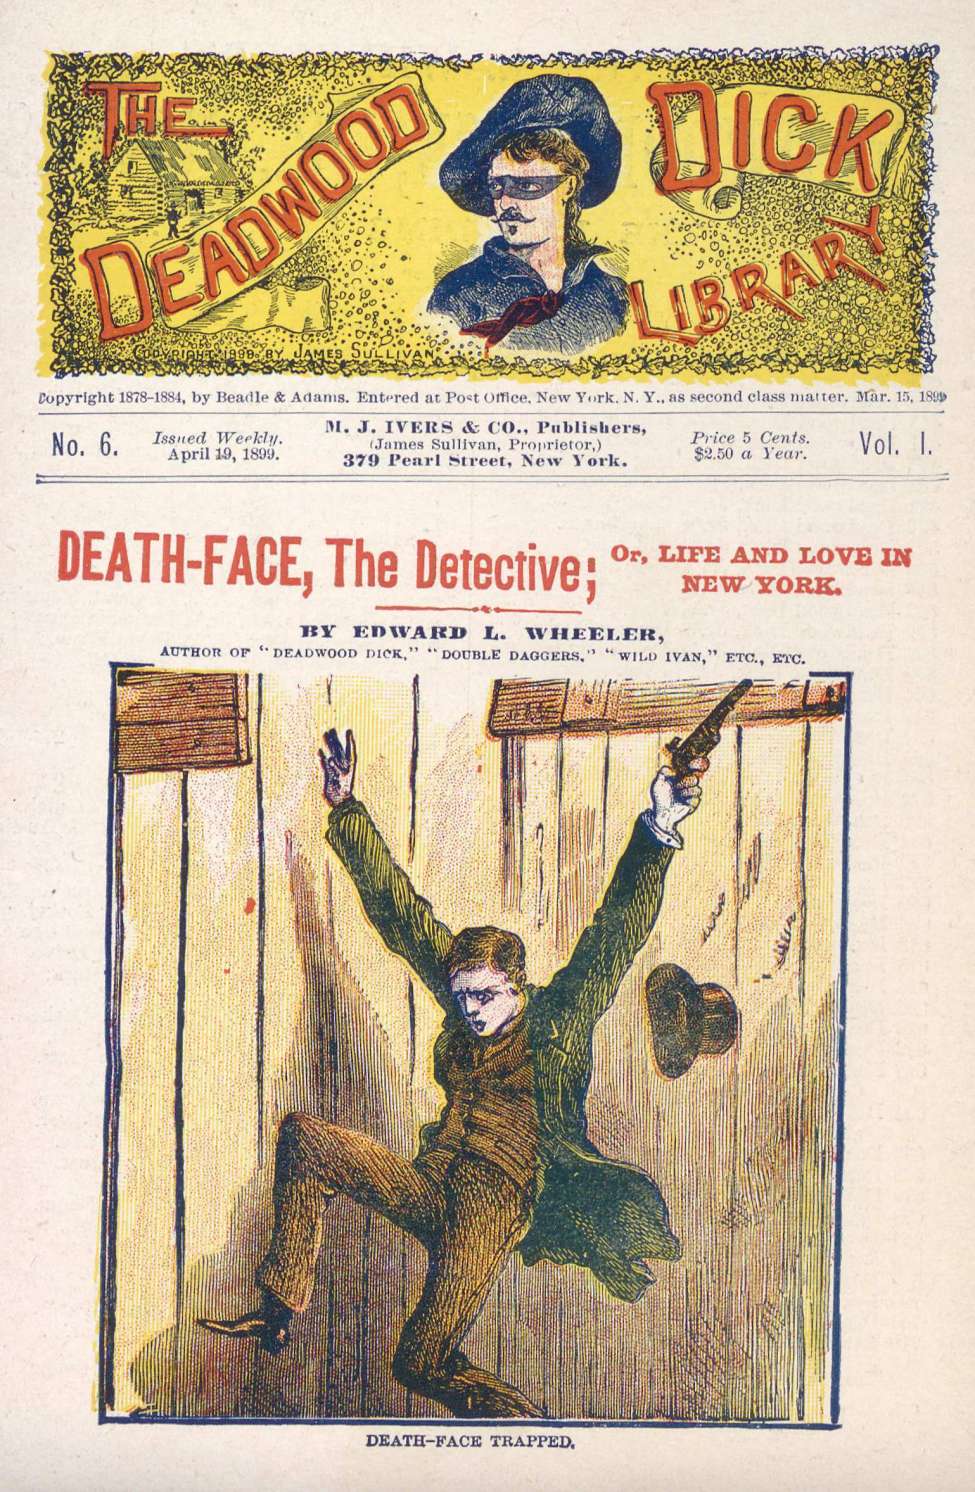 Book Cover For Deadwood Dick Library v1 6 - Death-face, The Detective